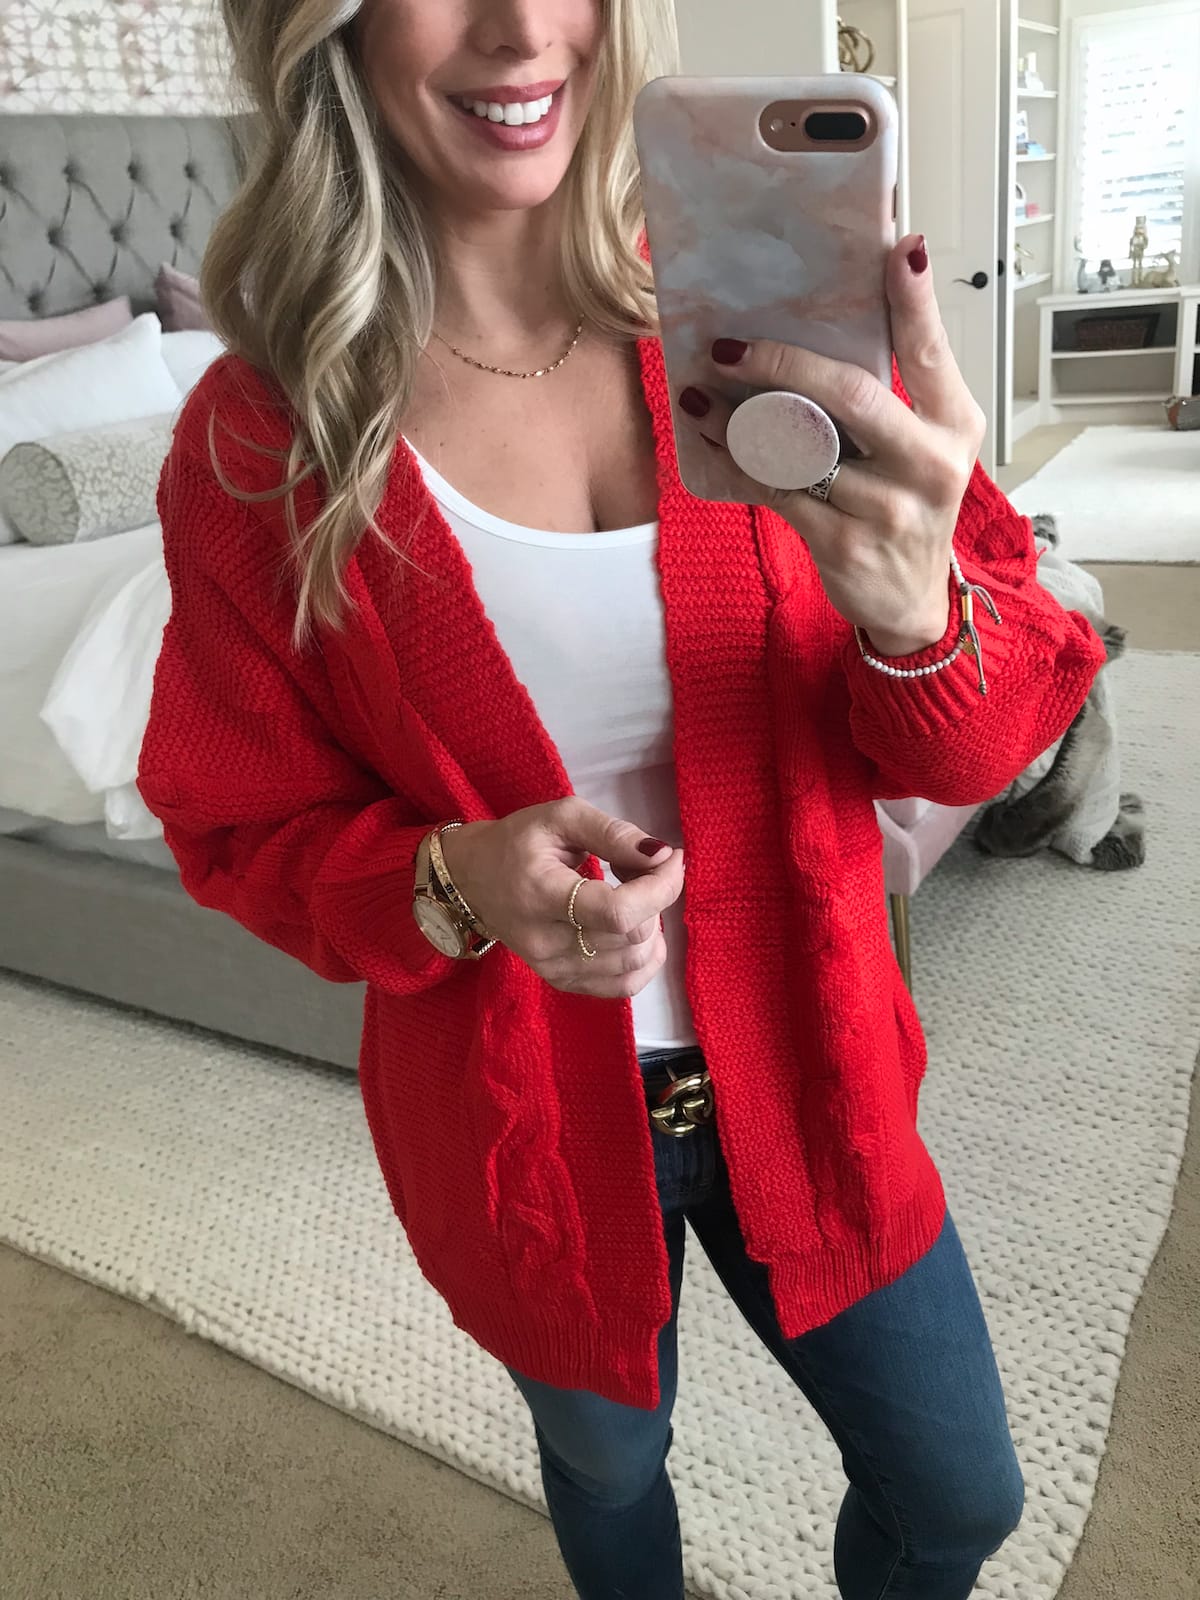 Amazon Fashion Haul - jeans and red cardigan